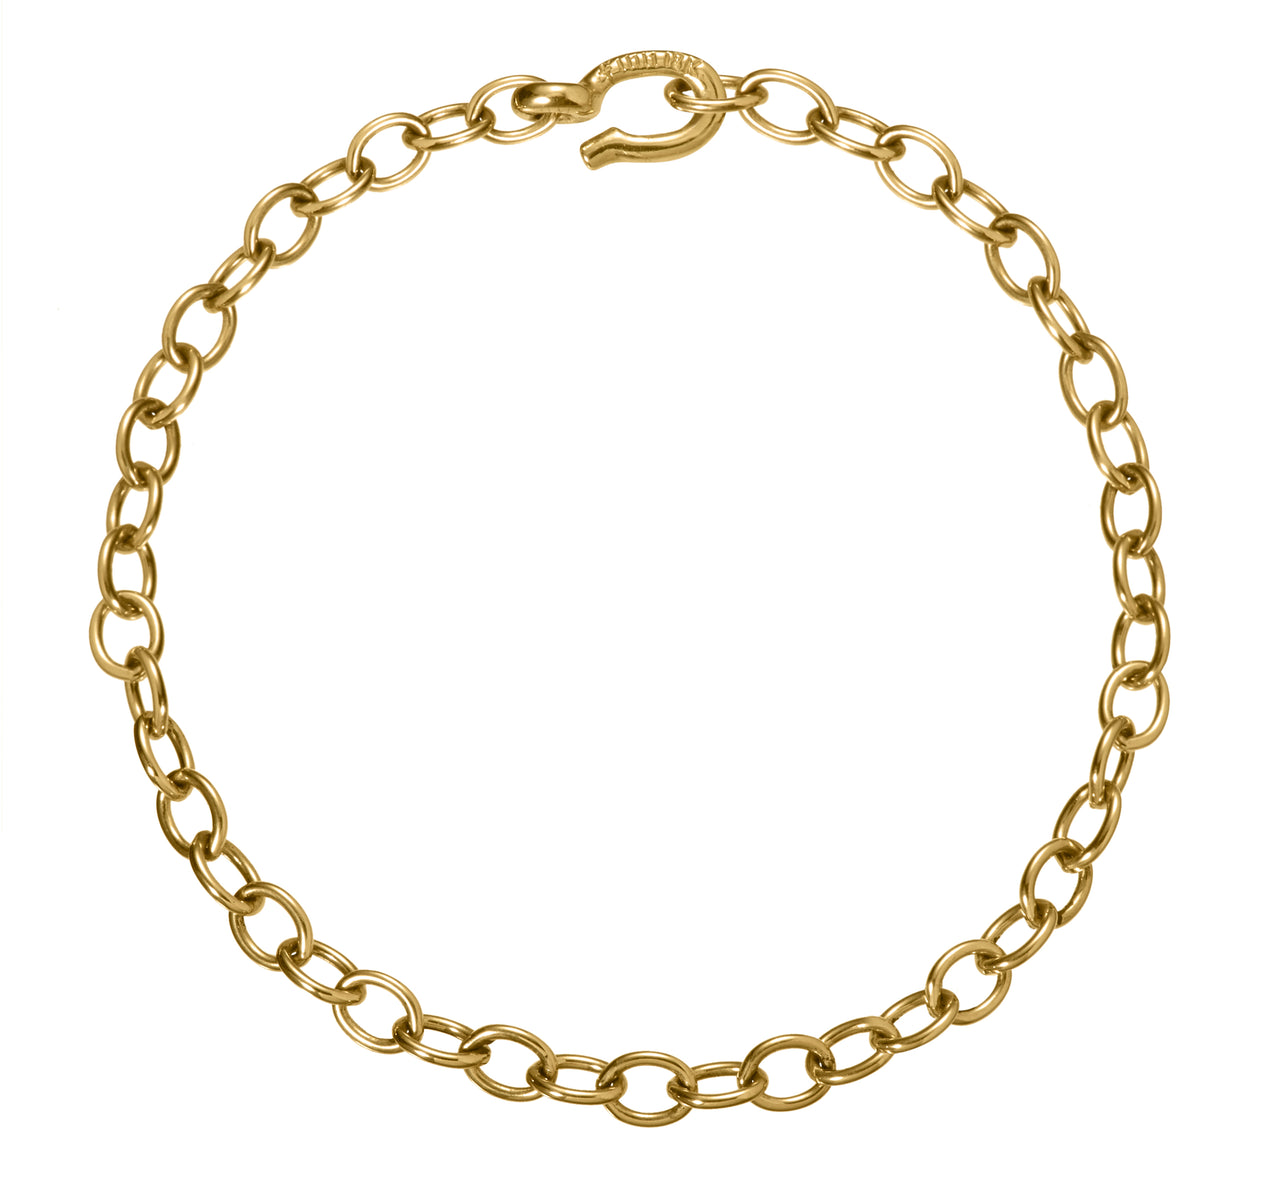 sturdy everyday nautical 18k gold hook and chain bracelet by finn by candice pool neistat